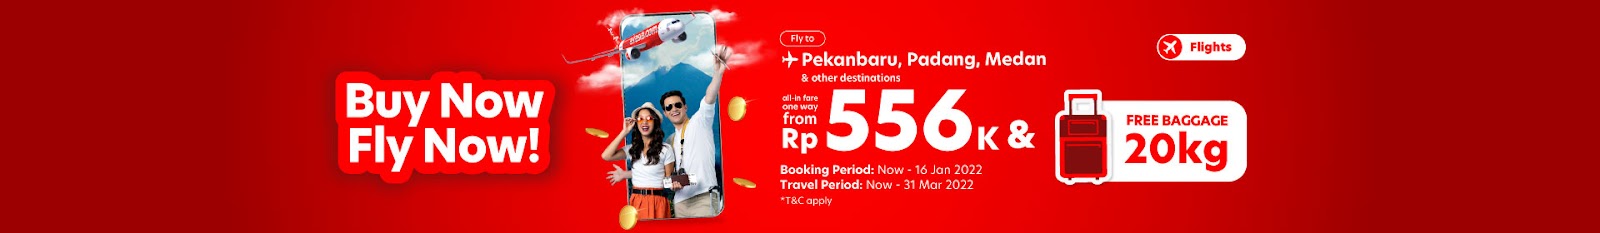 Fly now from Rp 556K